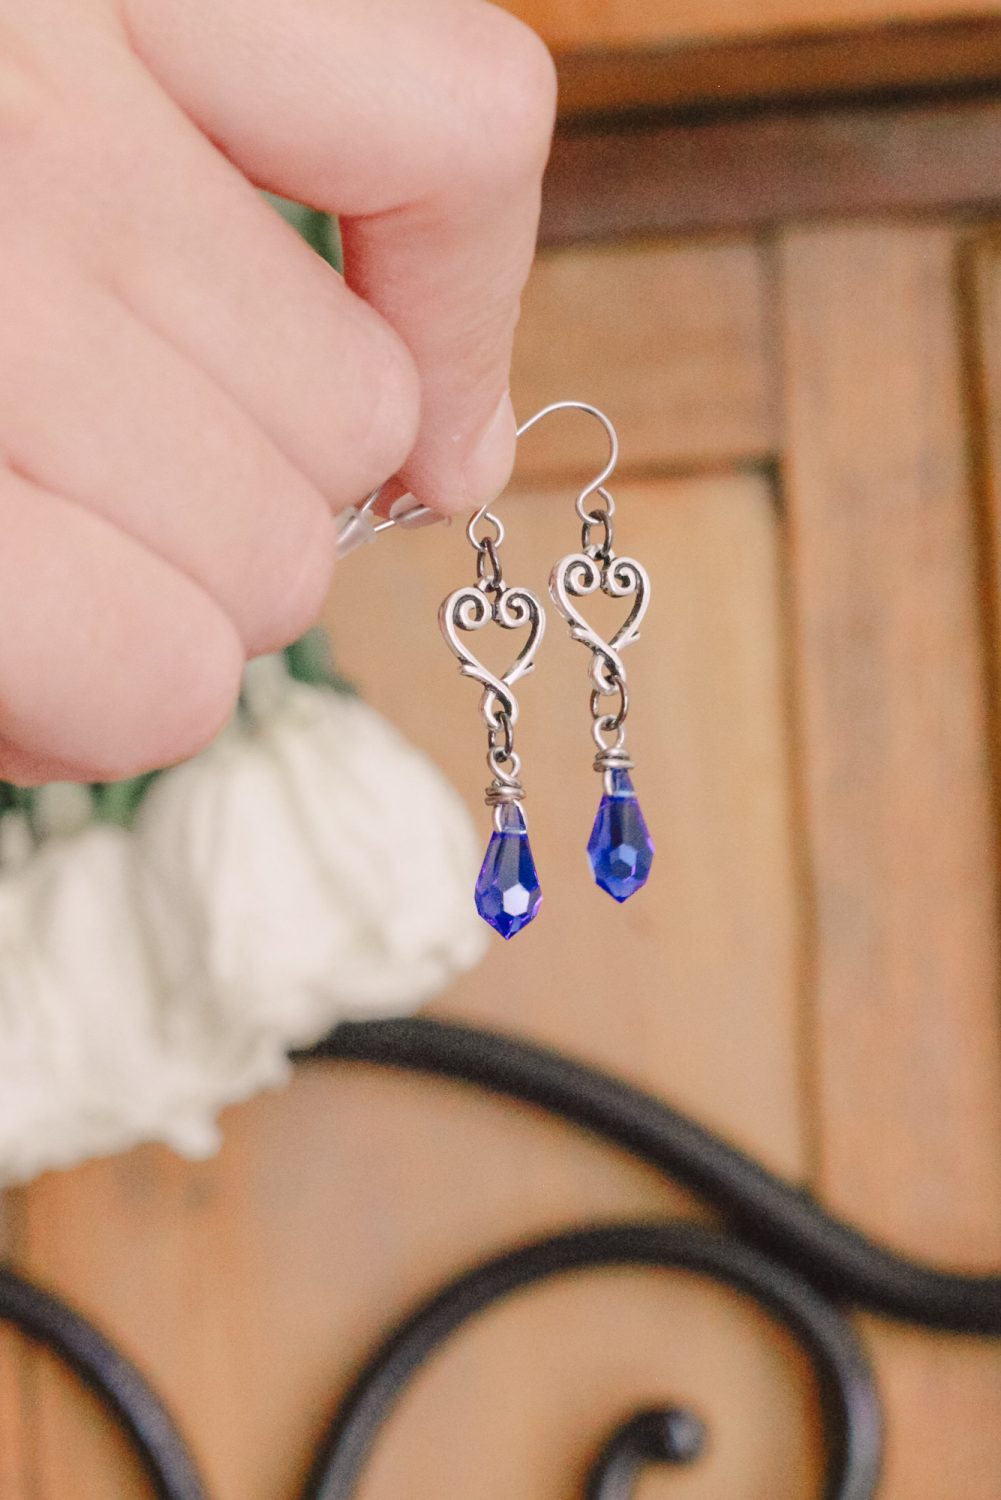 Elegant sapphire blue crystal heart drop earrings. A seamless choice for a “something blue” bridal gift.” #blueearrings #somethingblue #somethingbluegift #crystalearrings #heartdropearrings #crystaldropearrings